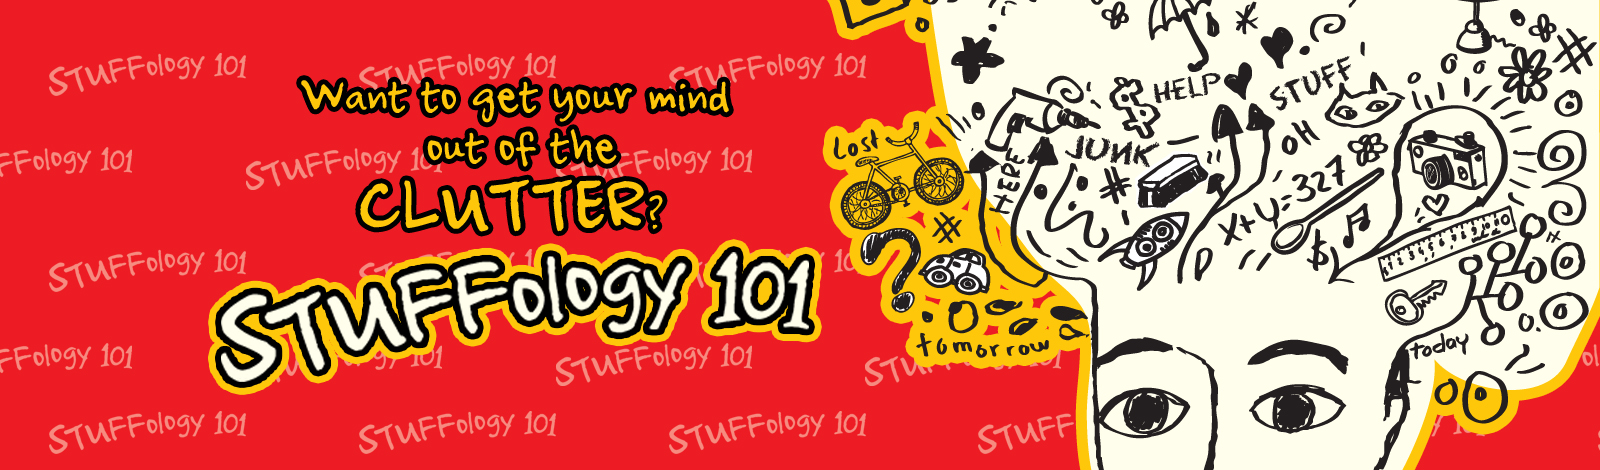 Stuffology 101: Get your mind out of the clutter